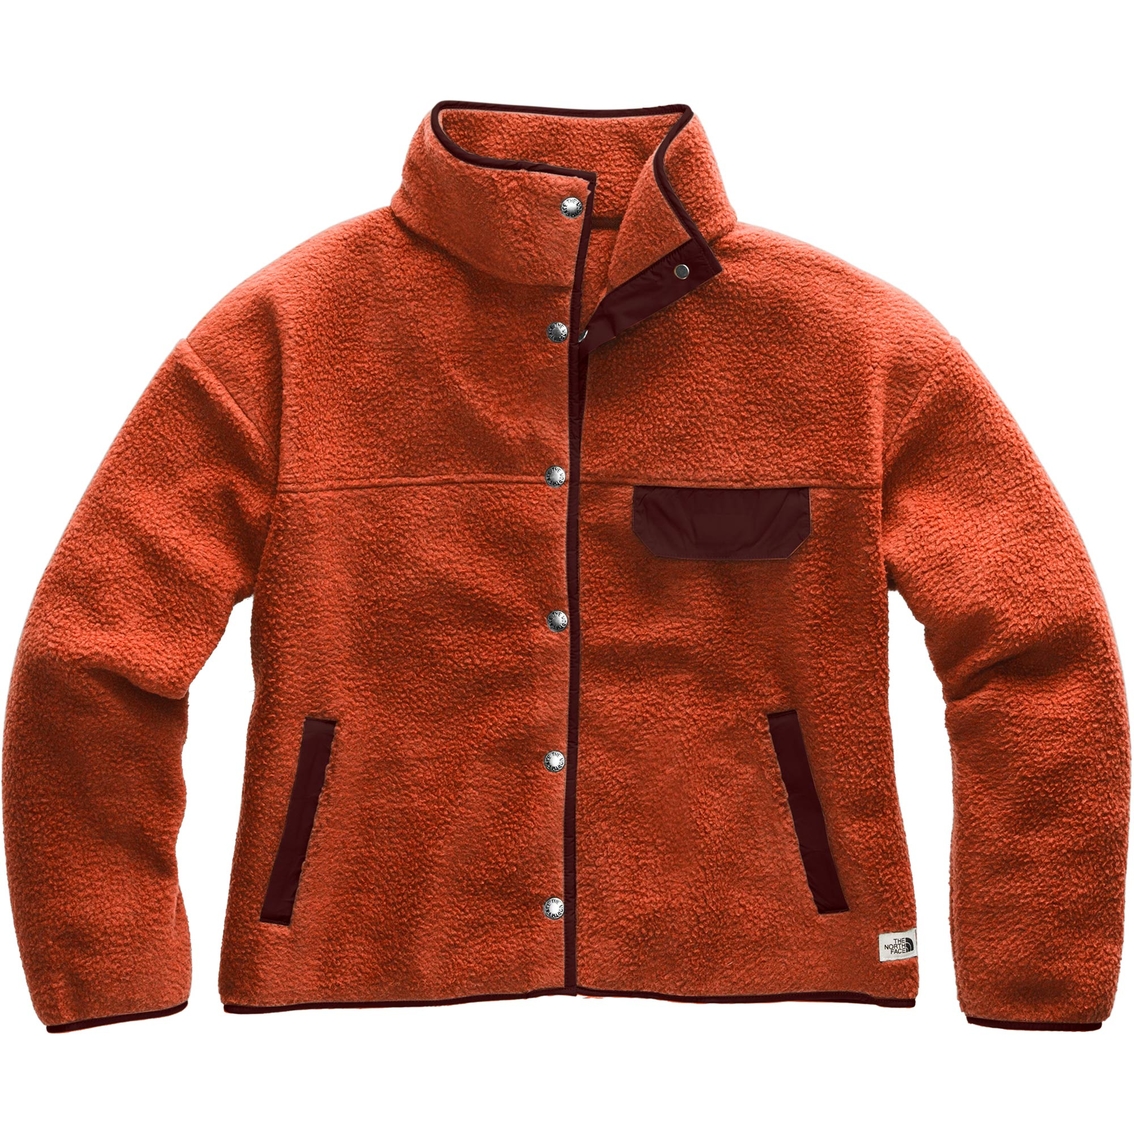 The North Face Cragmont Fleece Jacket | Jackets | Clothing & Accessories |  Shop The Exchange